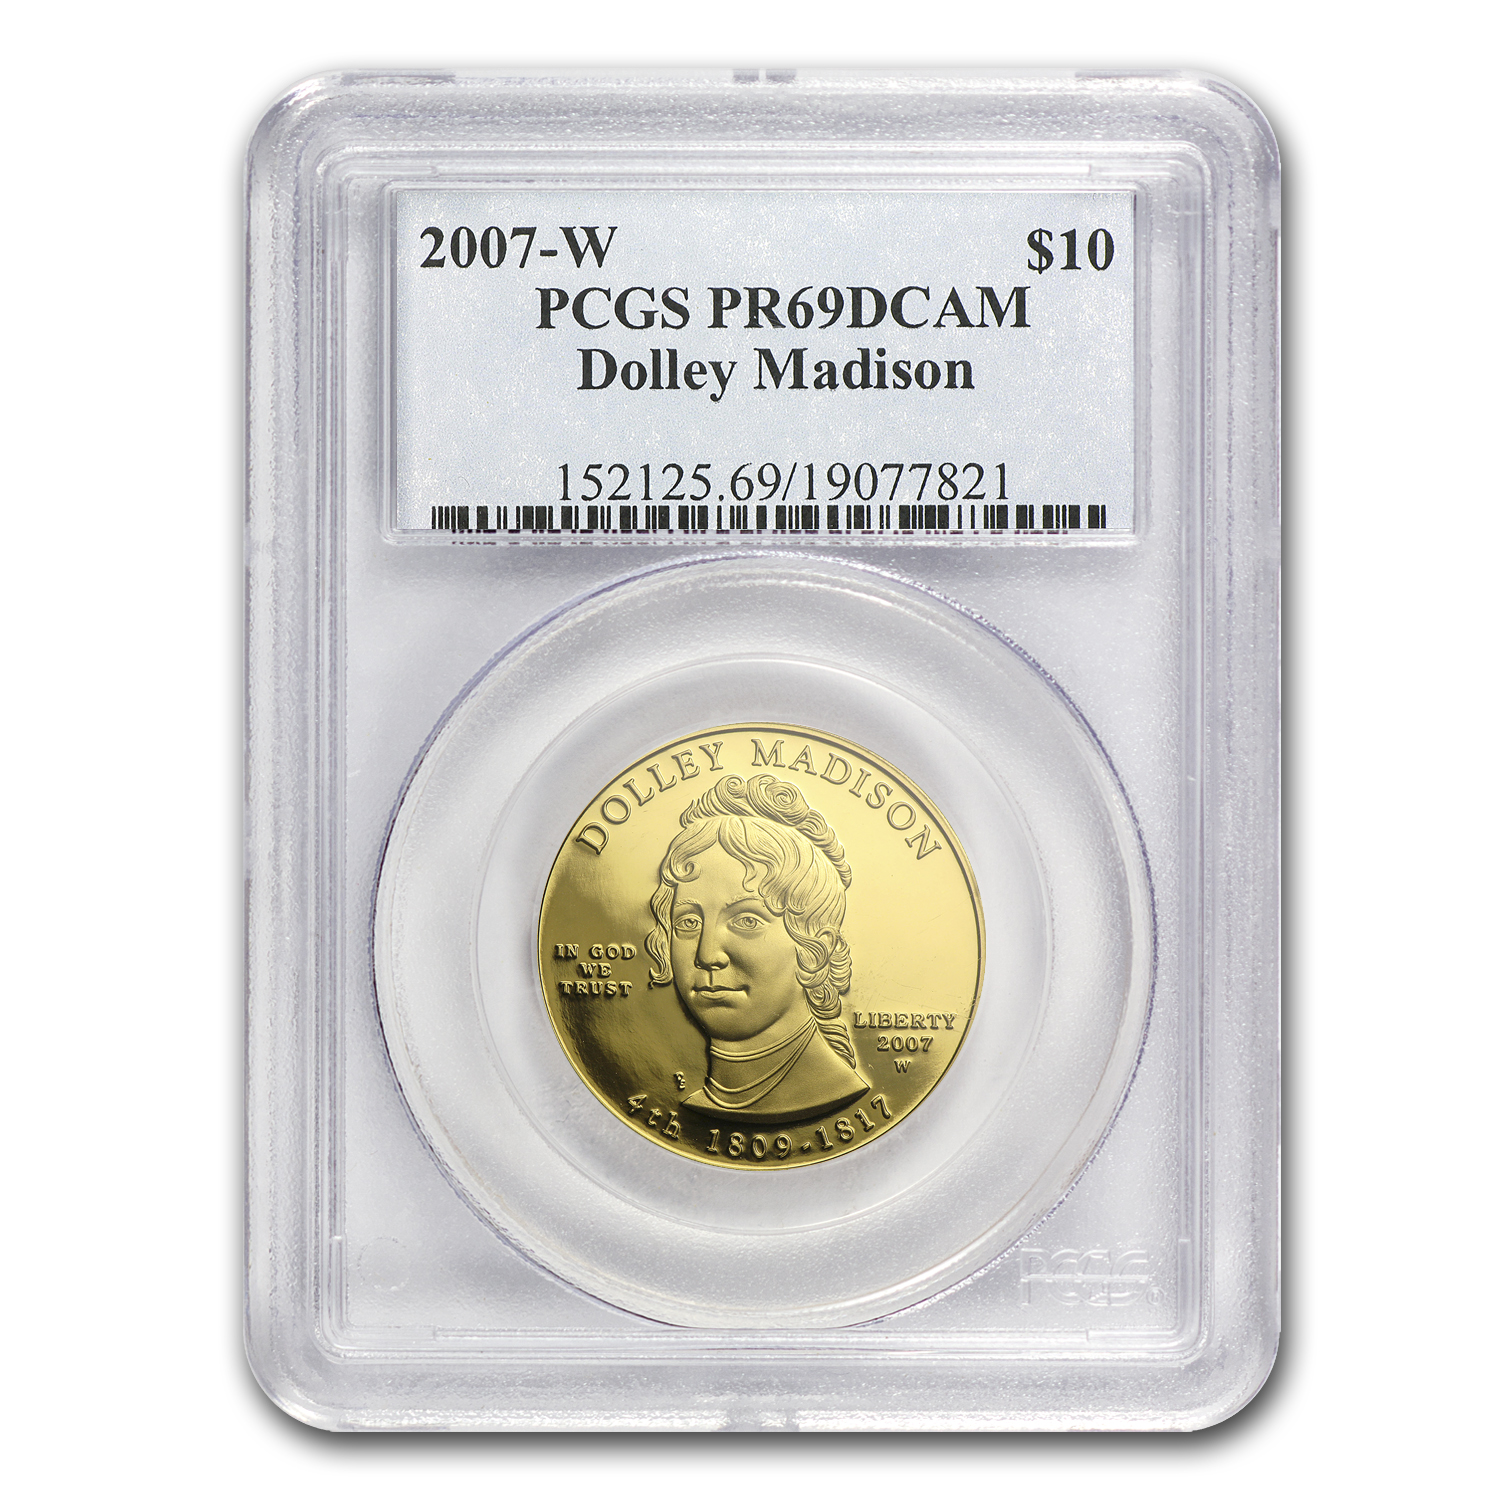 Buy 2007-W 1/2 oz Proof Gold Dolley Madison PR-69 PCGS - Click Image to Close